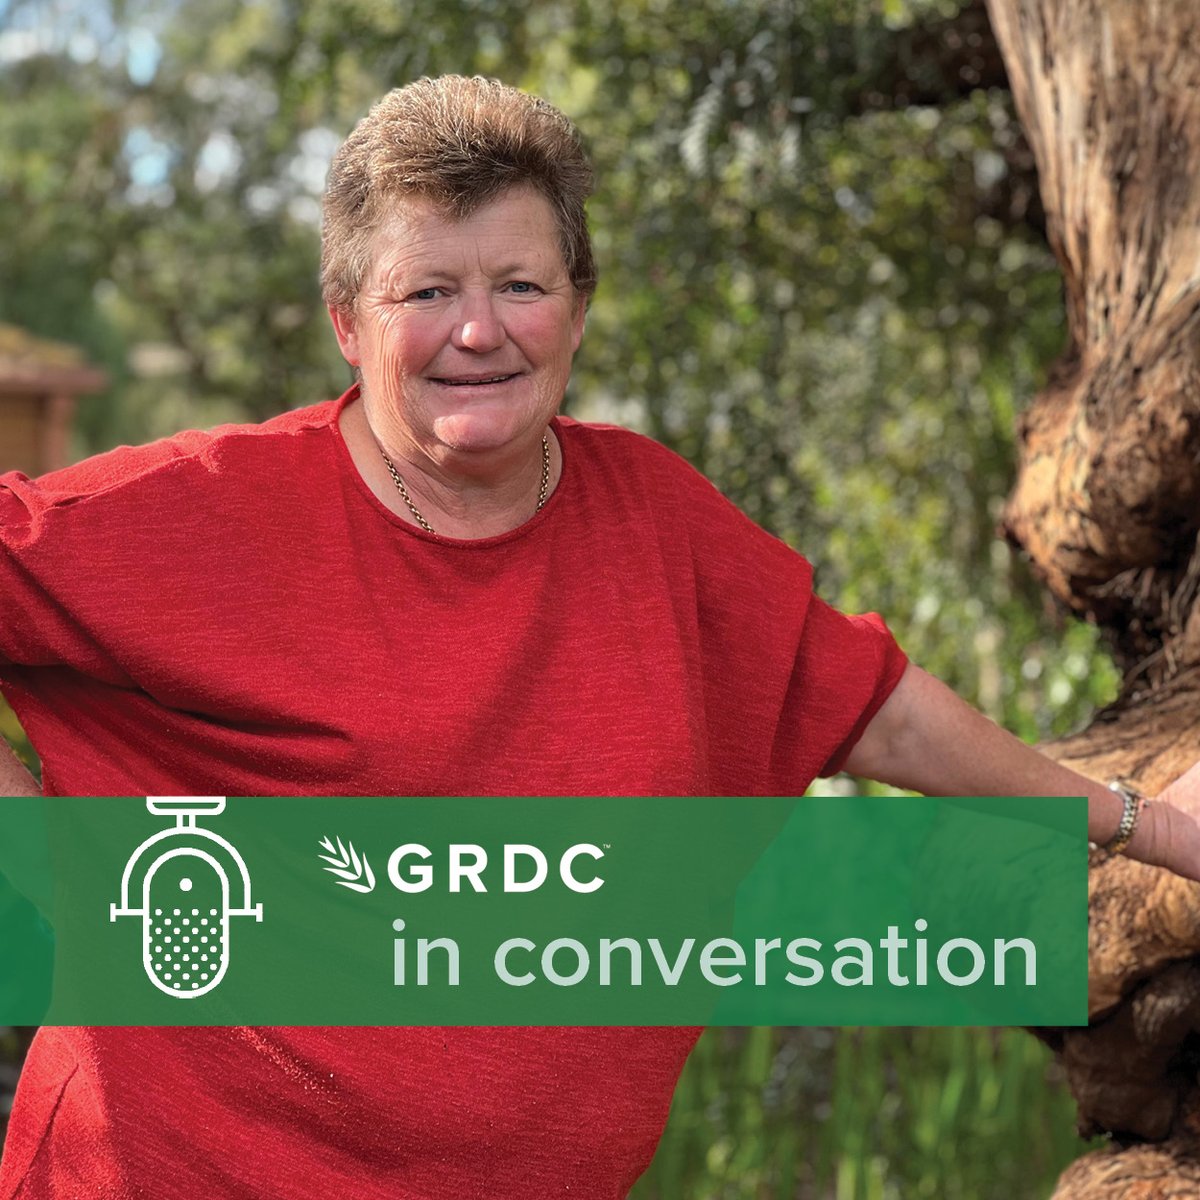 🎙️NEW PODCAST 'GRDC in Conversation' features the journeys, passions & everyday lives of the people shaping our grains industry, talking to @Olilelievre Today we meet Kate Burke @Think_Agri - agronomist, author, cereal chemist & more! Listen now ▶️ bit.ly/3sAK1vV